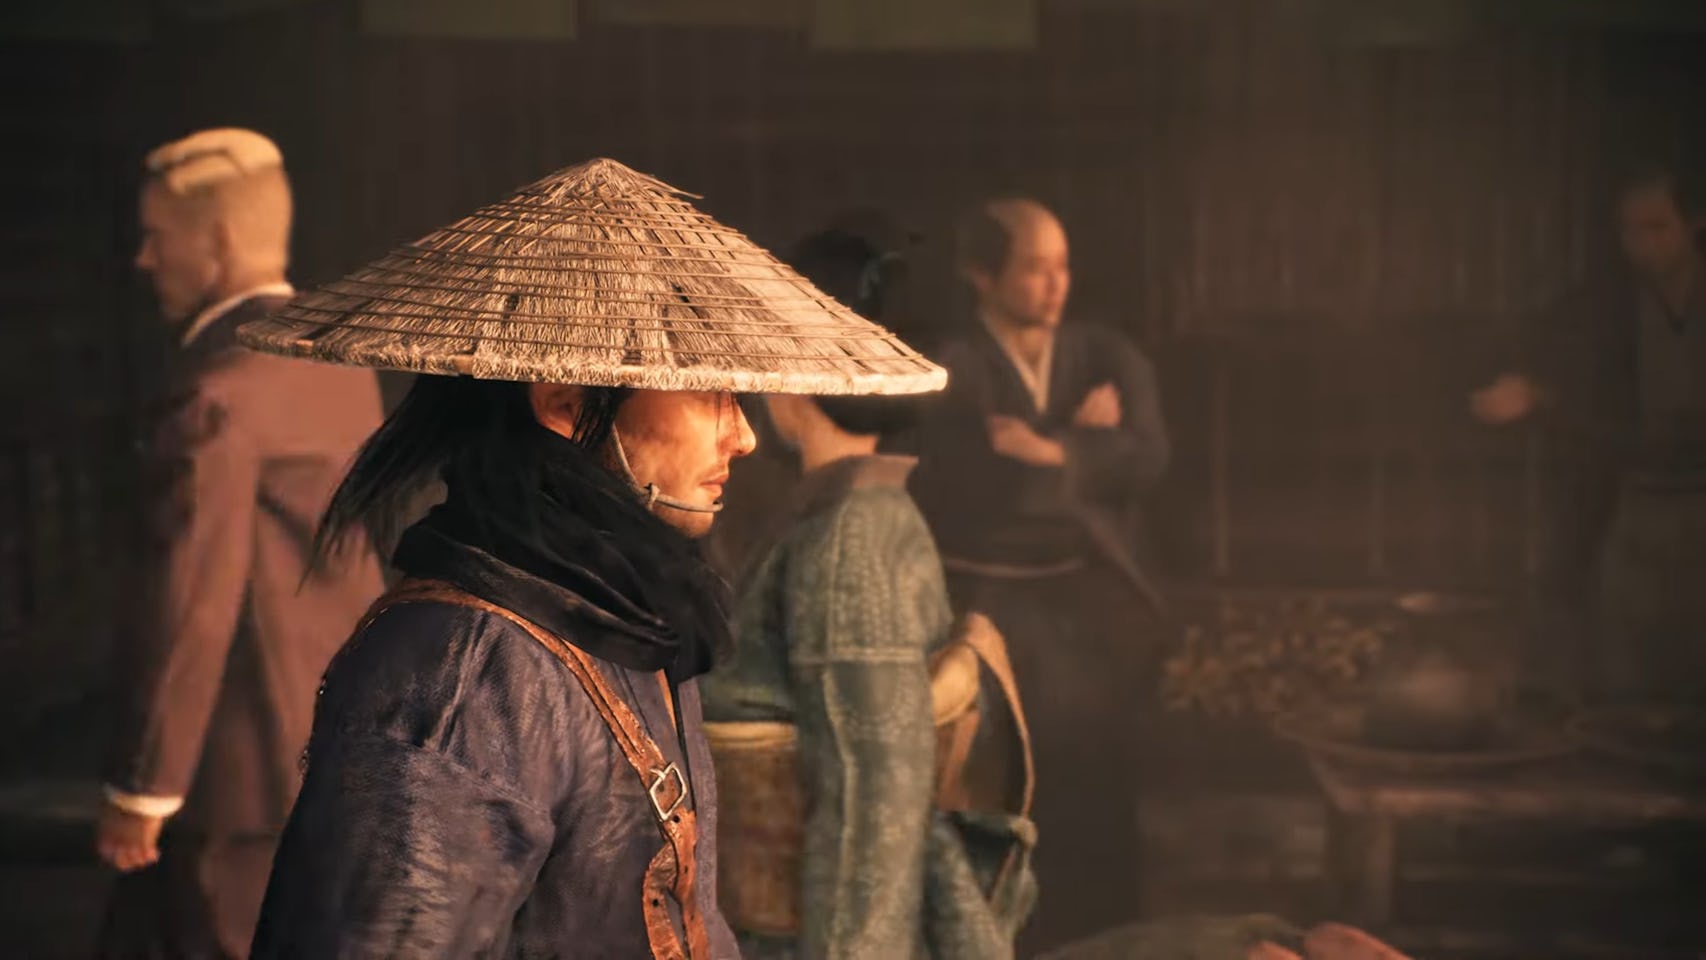 Rise of the Ronin' trailer in 12 breathtaking images